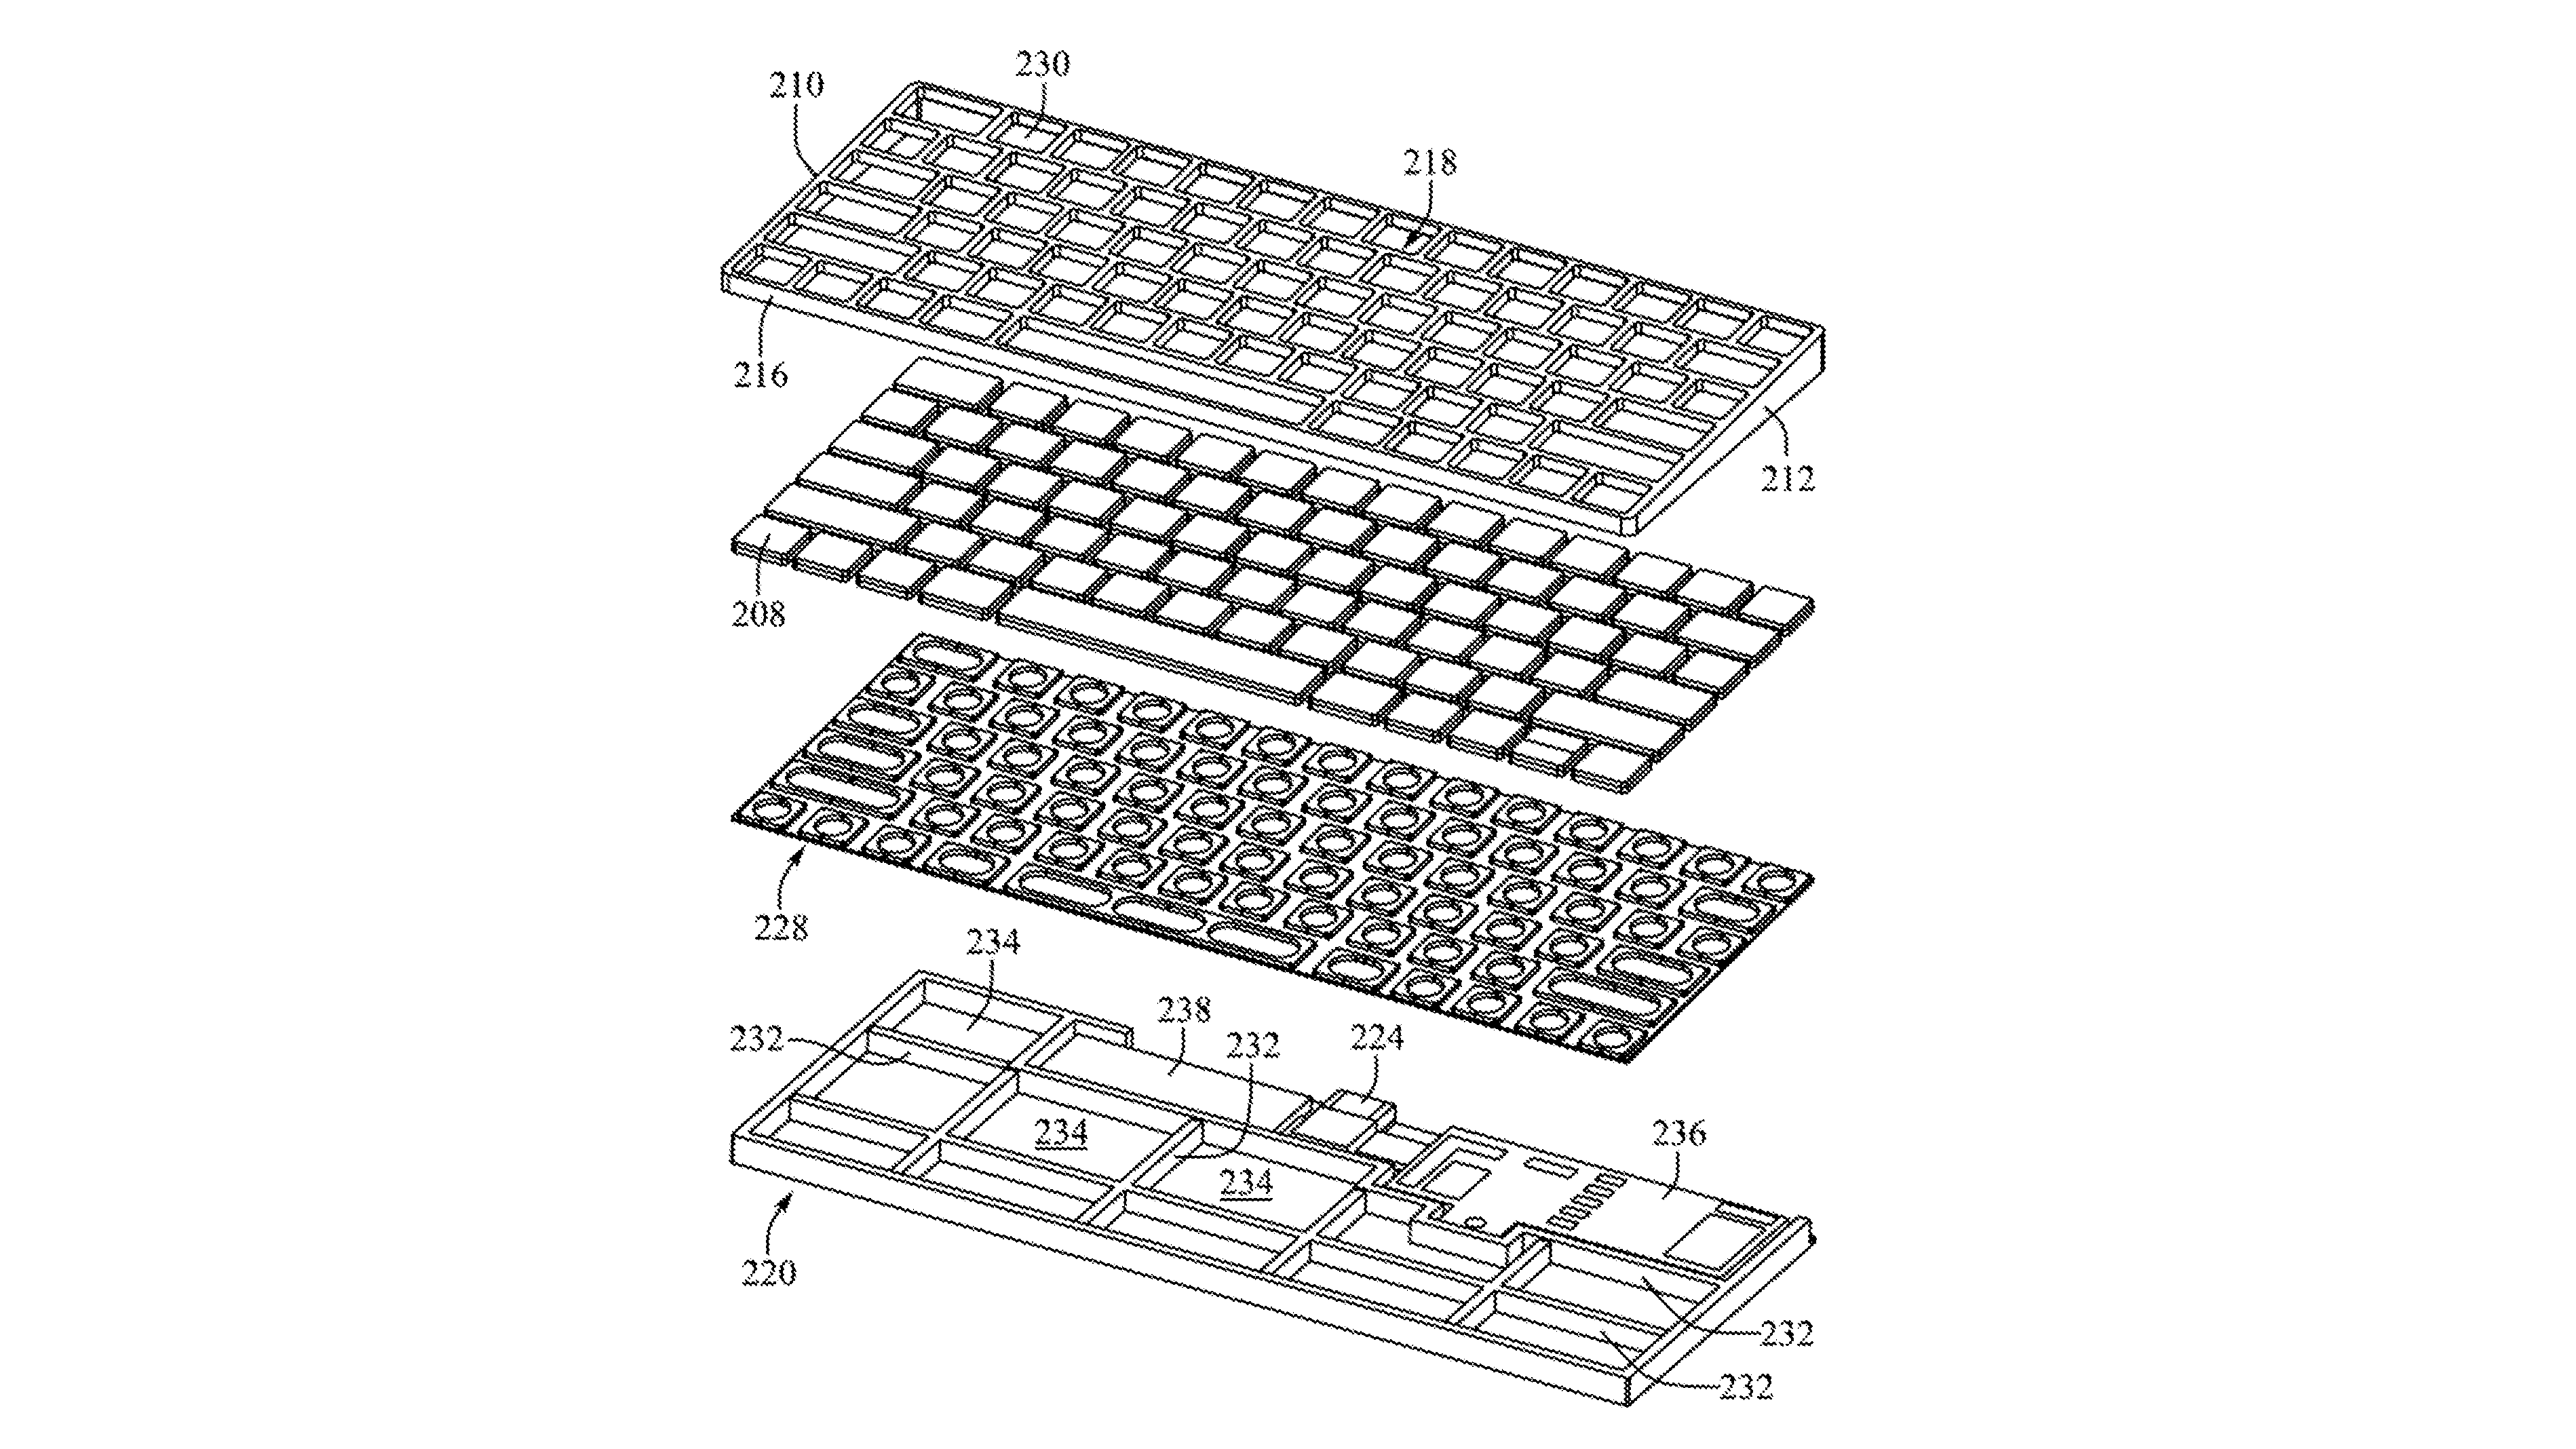 A patent drawing filed as part of Apple's USPTO patent application for a computer in an input device which details how the company could integrate a whole Mac inside a Magic Keyboard. The drawing depicts an isometric exploding view of the device's components, such as the external casing with the keys, the keyboard section and the internal side with the battery components along with the miniature logic board, a single input and output port, and more.